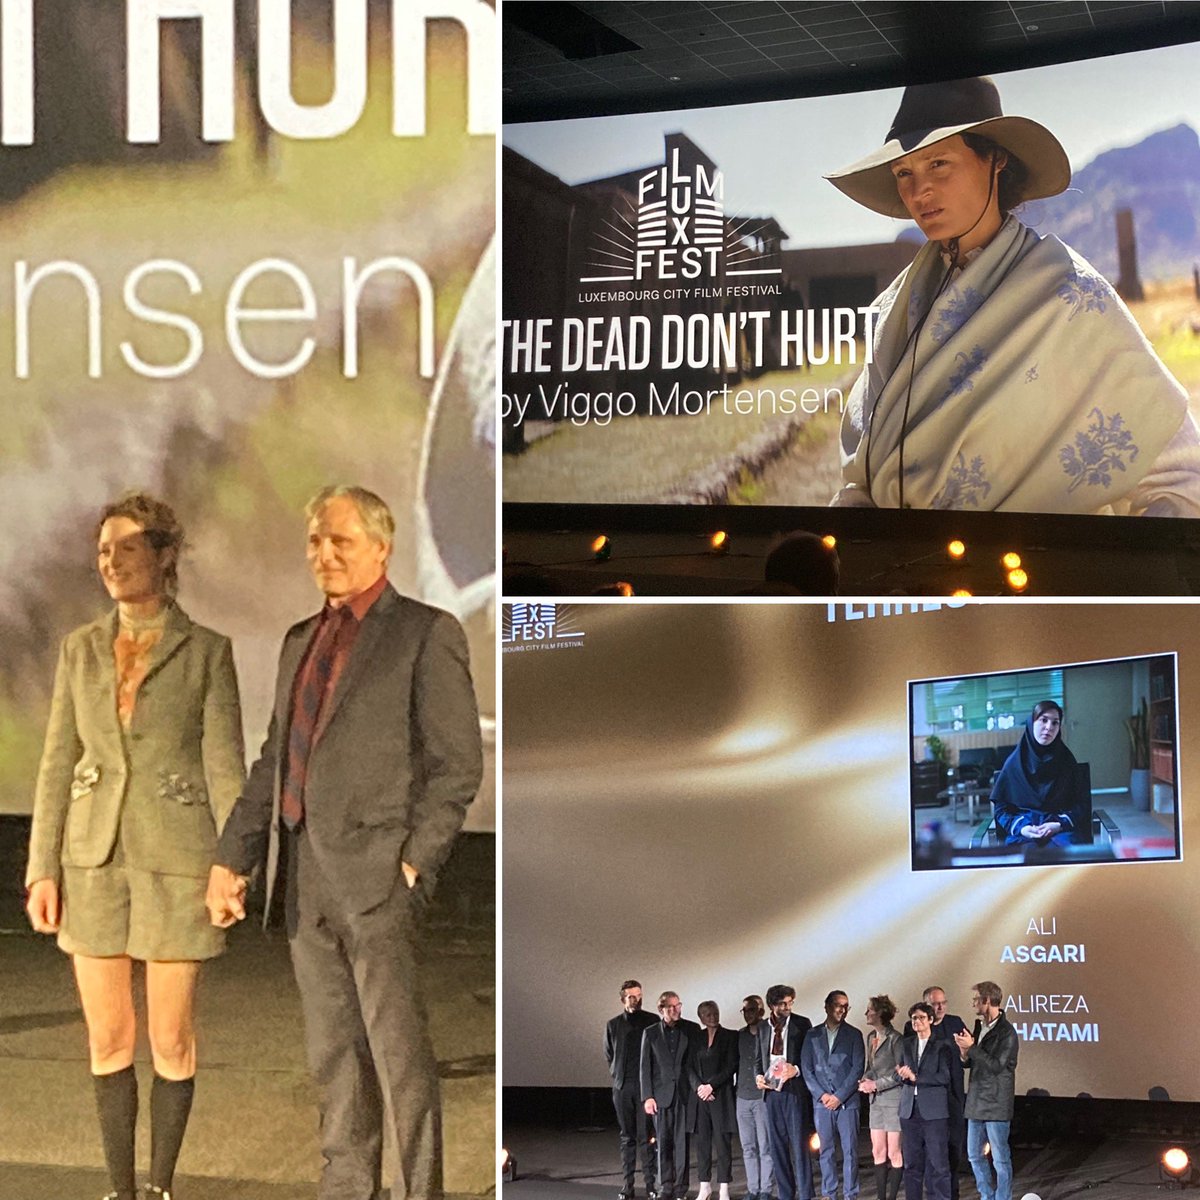 Deligthed to attend the Luxembourg Premiere of Viggo Mortensen’s @ViggoArt latest film „The Dead don‘t hurt“ with actress Vicky Krieps @VKrieps during this year‘s #LuxFilmFest Award Ceremony 🎥 @luxfilmfest